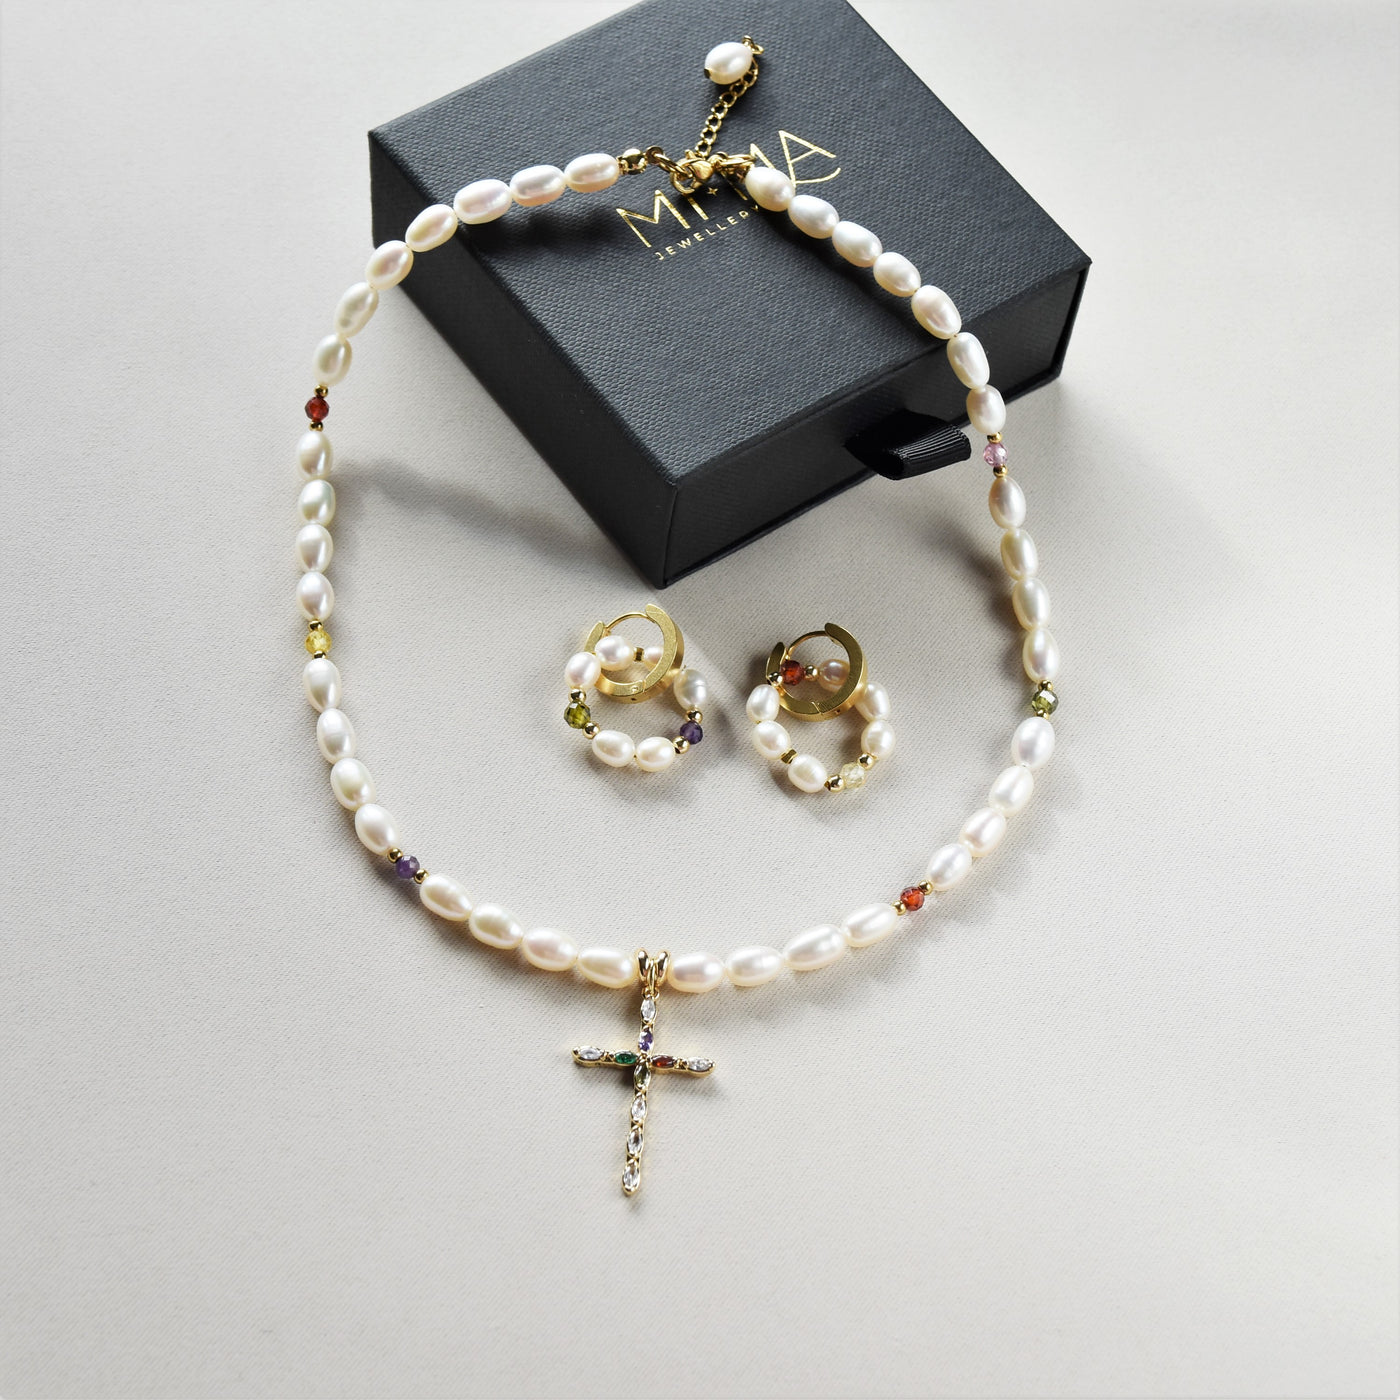 Pearl necklace with a cross